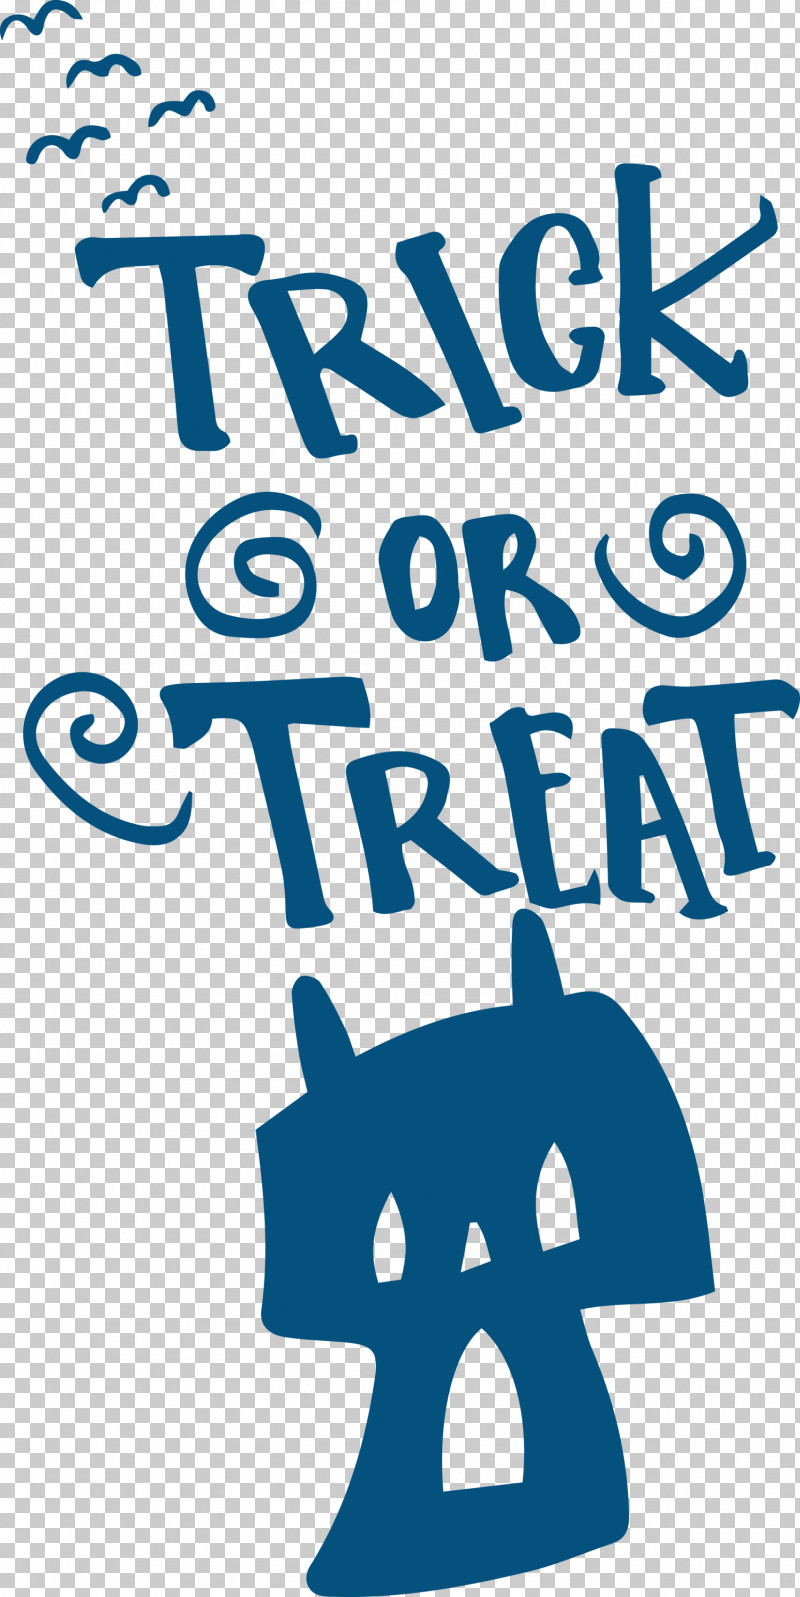 Trick-or-treating Trick Or Treat Halloween PNG, Clipart, Behavior, Cartoon, Geometry, Halloween, Happiness Free PNG Download